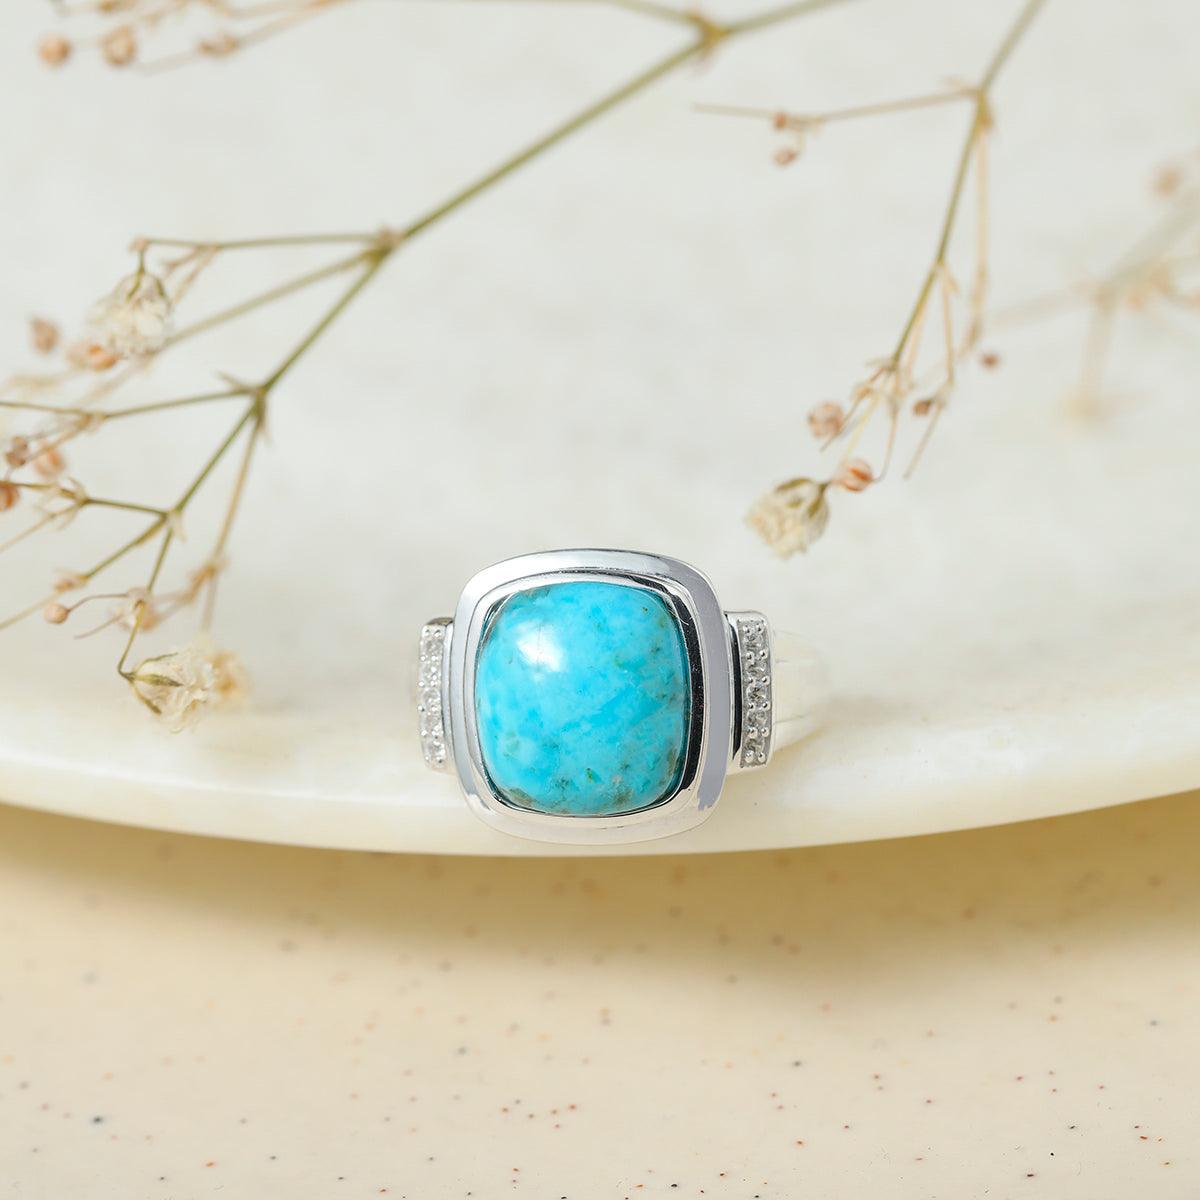 Turquoise & White Zircon Ring in 925 Sterling Silver - YoTreasure